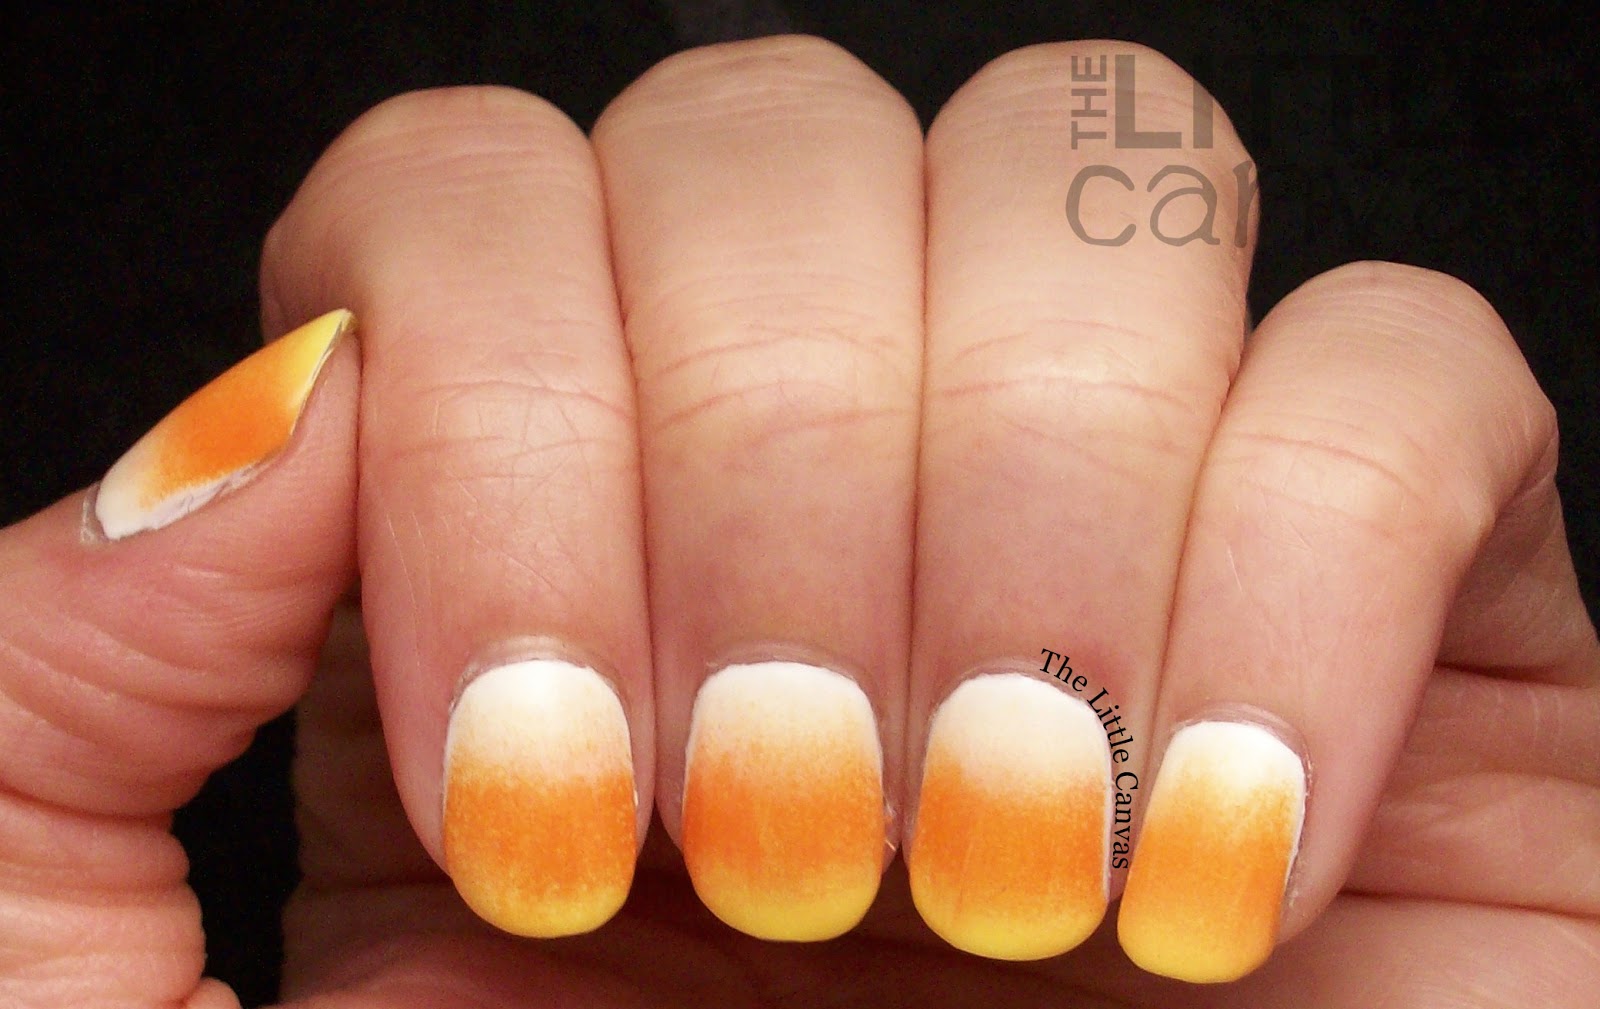 8. Halloween nail art with candy corn - wide 7